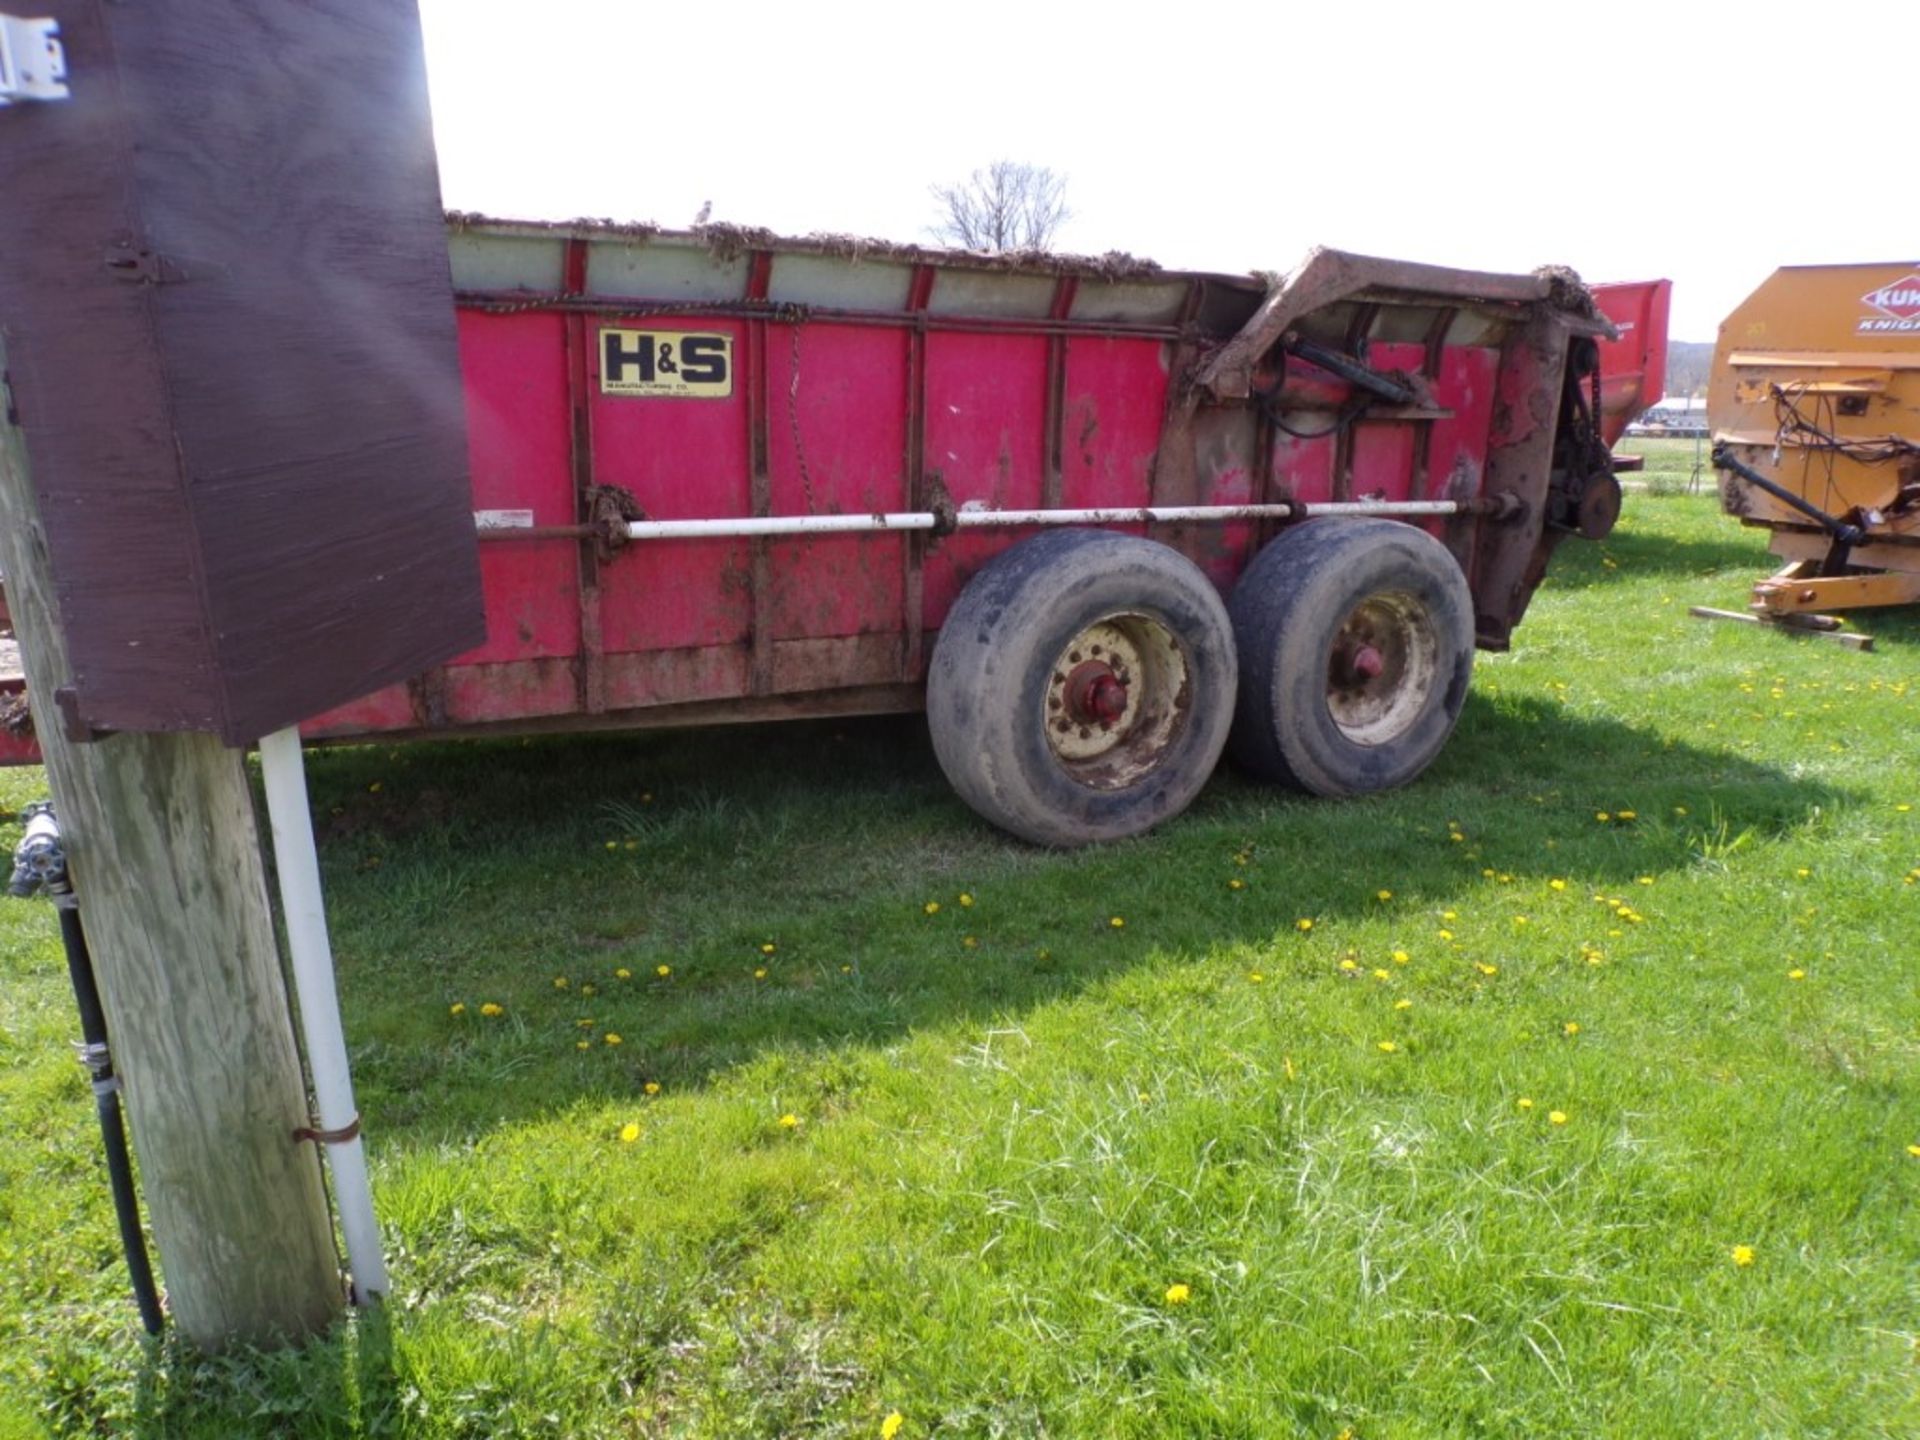 H & S 660 Big Box Spreader w/End Gate, Tandem Axle (4339) - Image 2 of 5